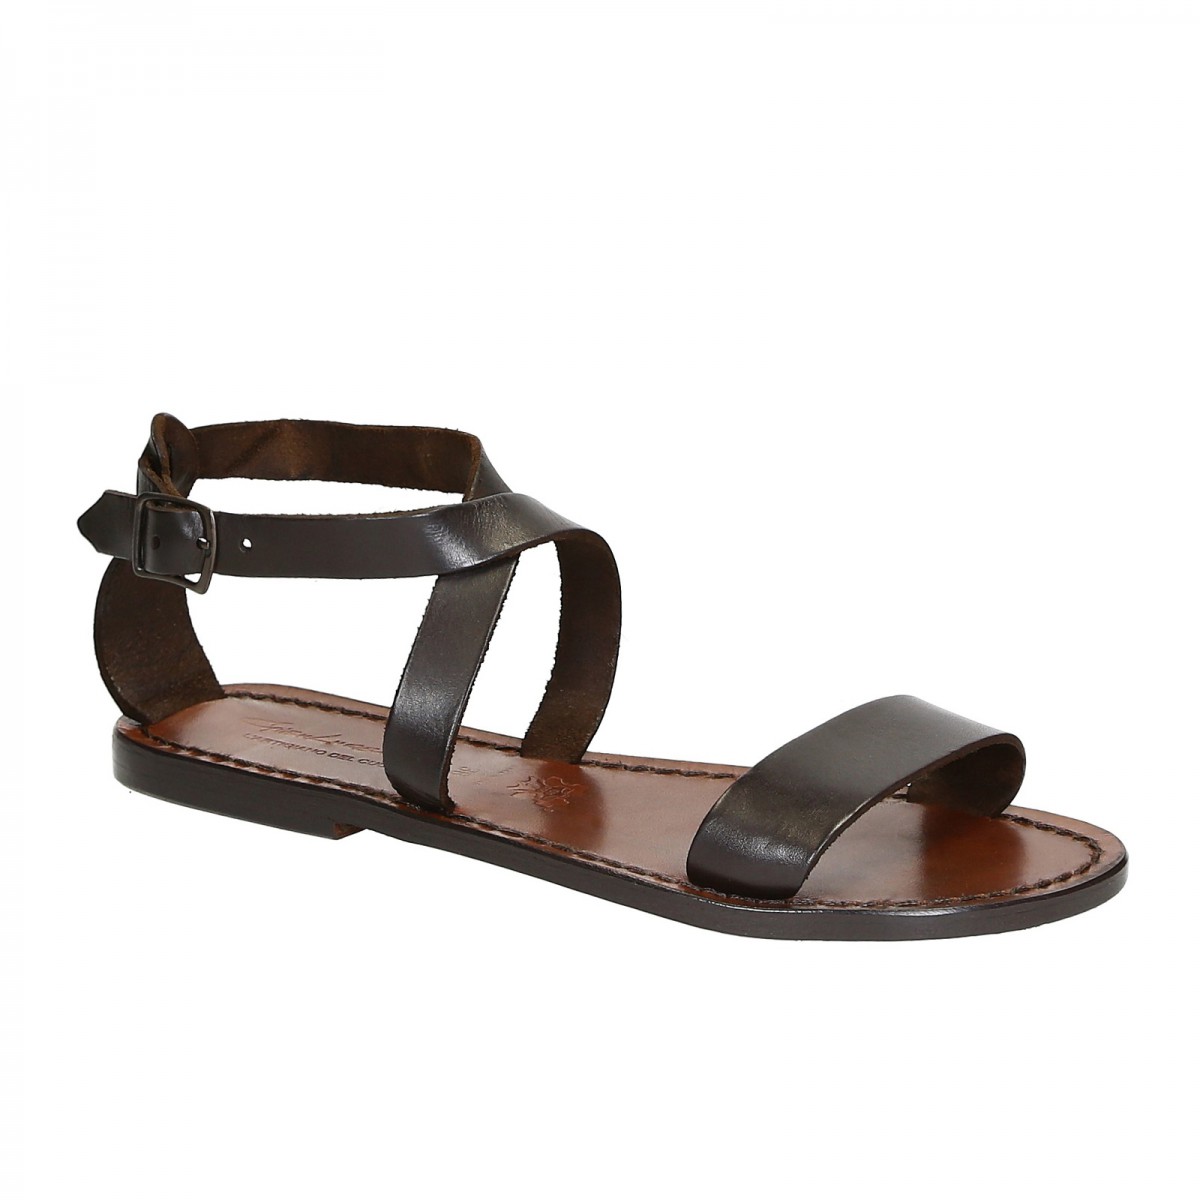 Womens sandals in Dark Brown Leather handmade in Italy | The leather ...